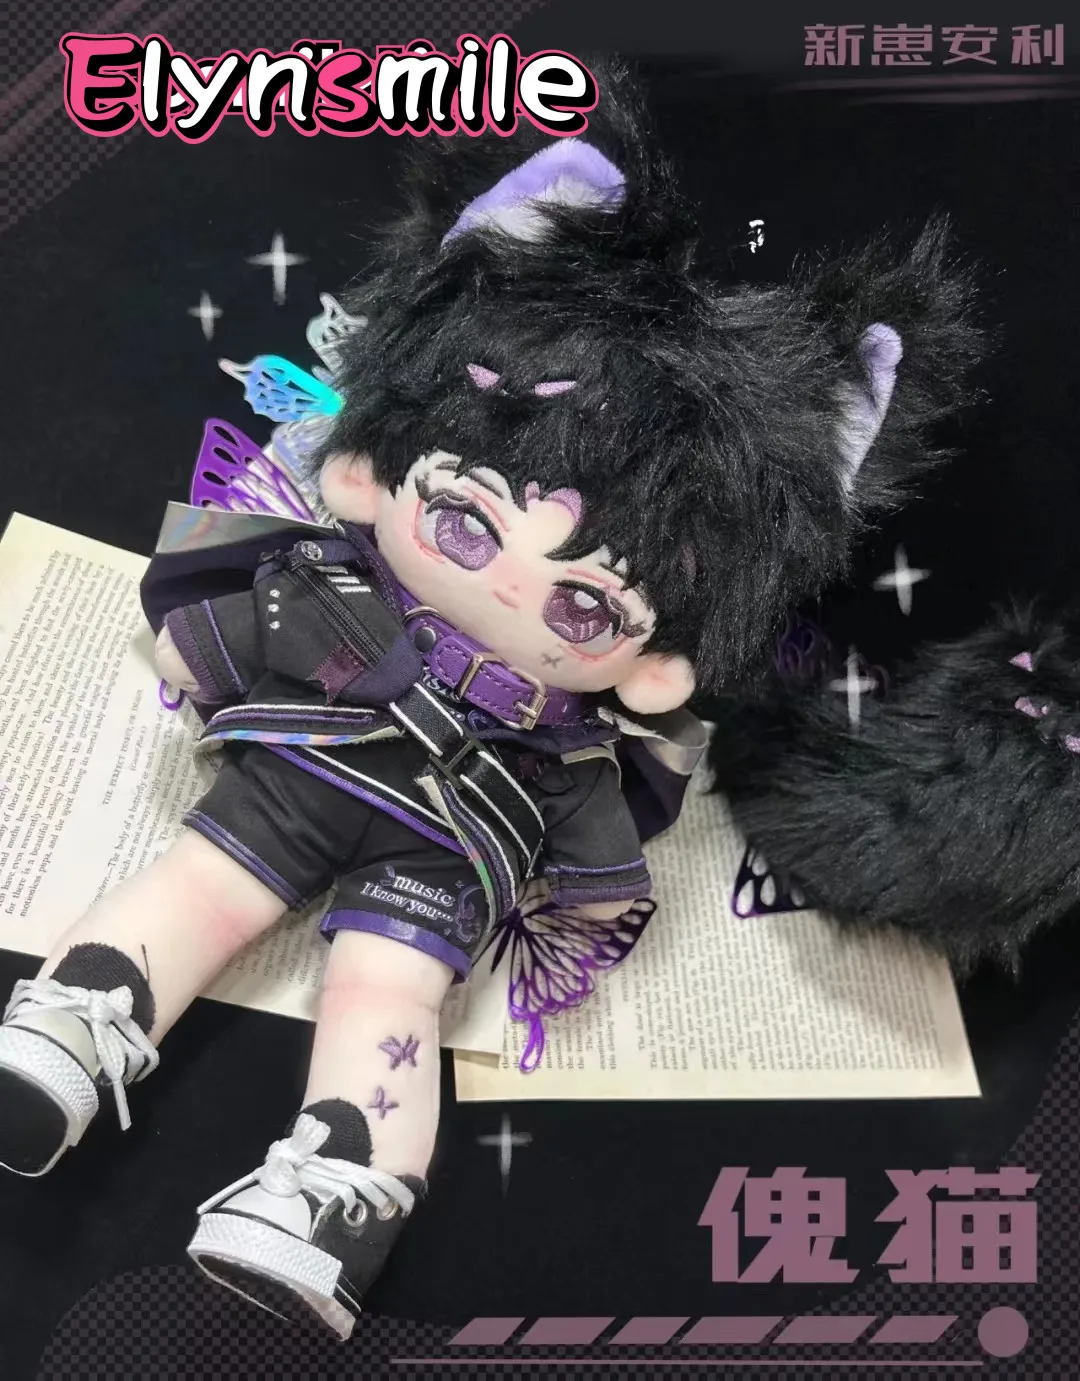 

In Stock Anime Game Monster Kui Mao Lovely Beast 25cm Plush Doll Pillow Dress Up Cosplay Anime Figure Toy For Kids Xmas Gifts